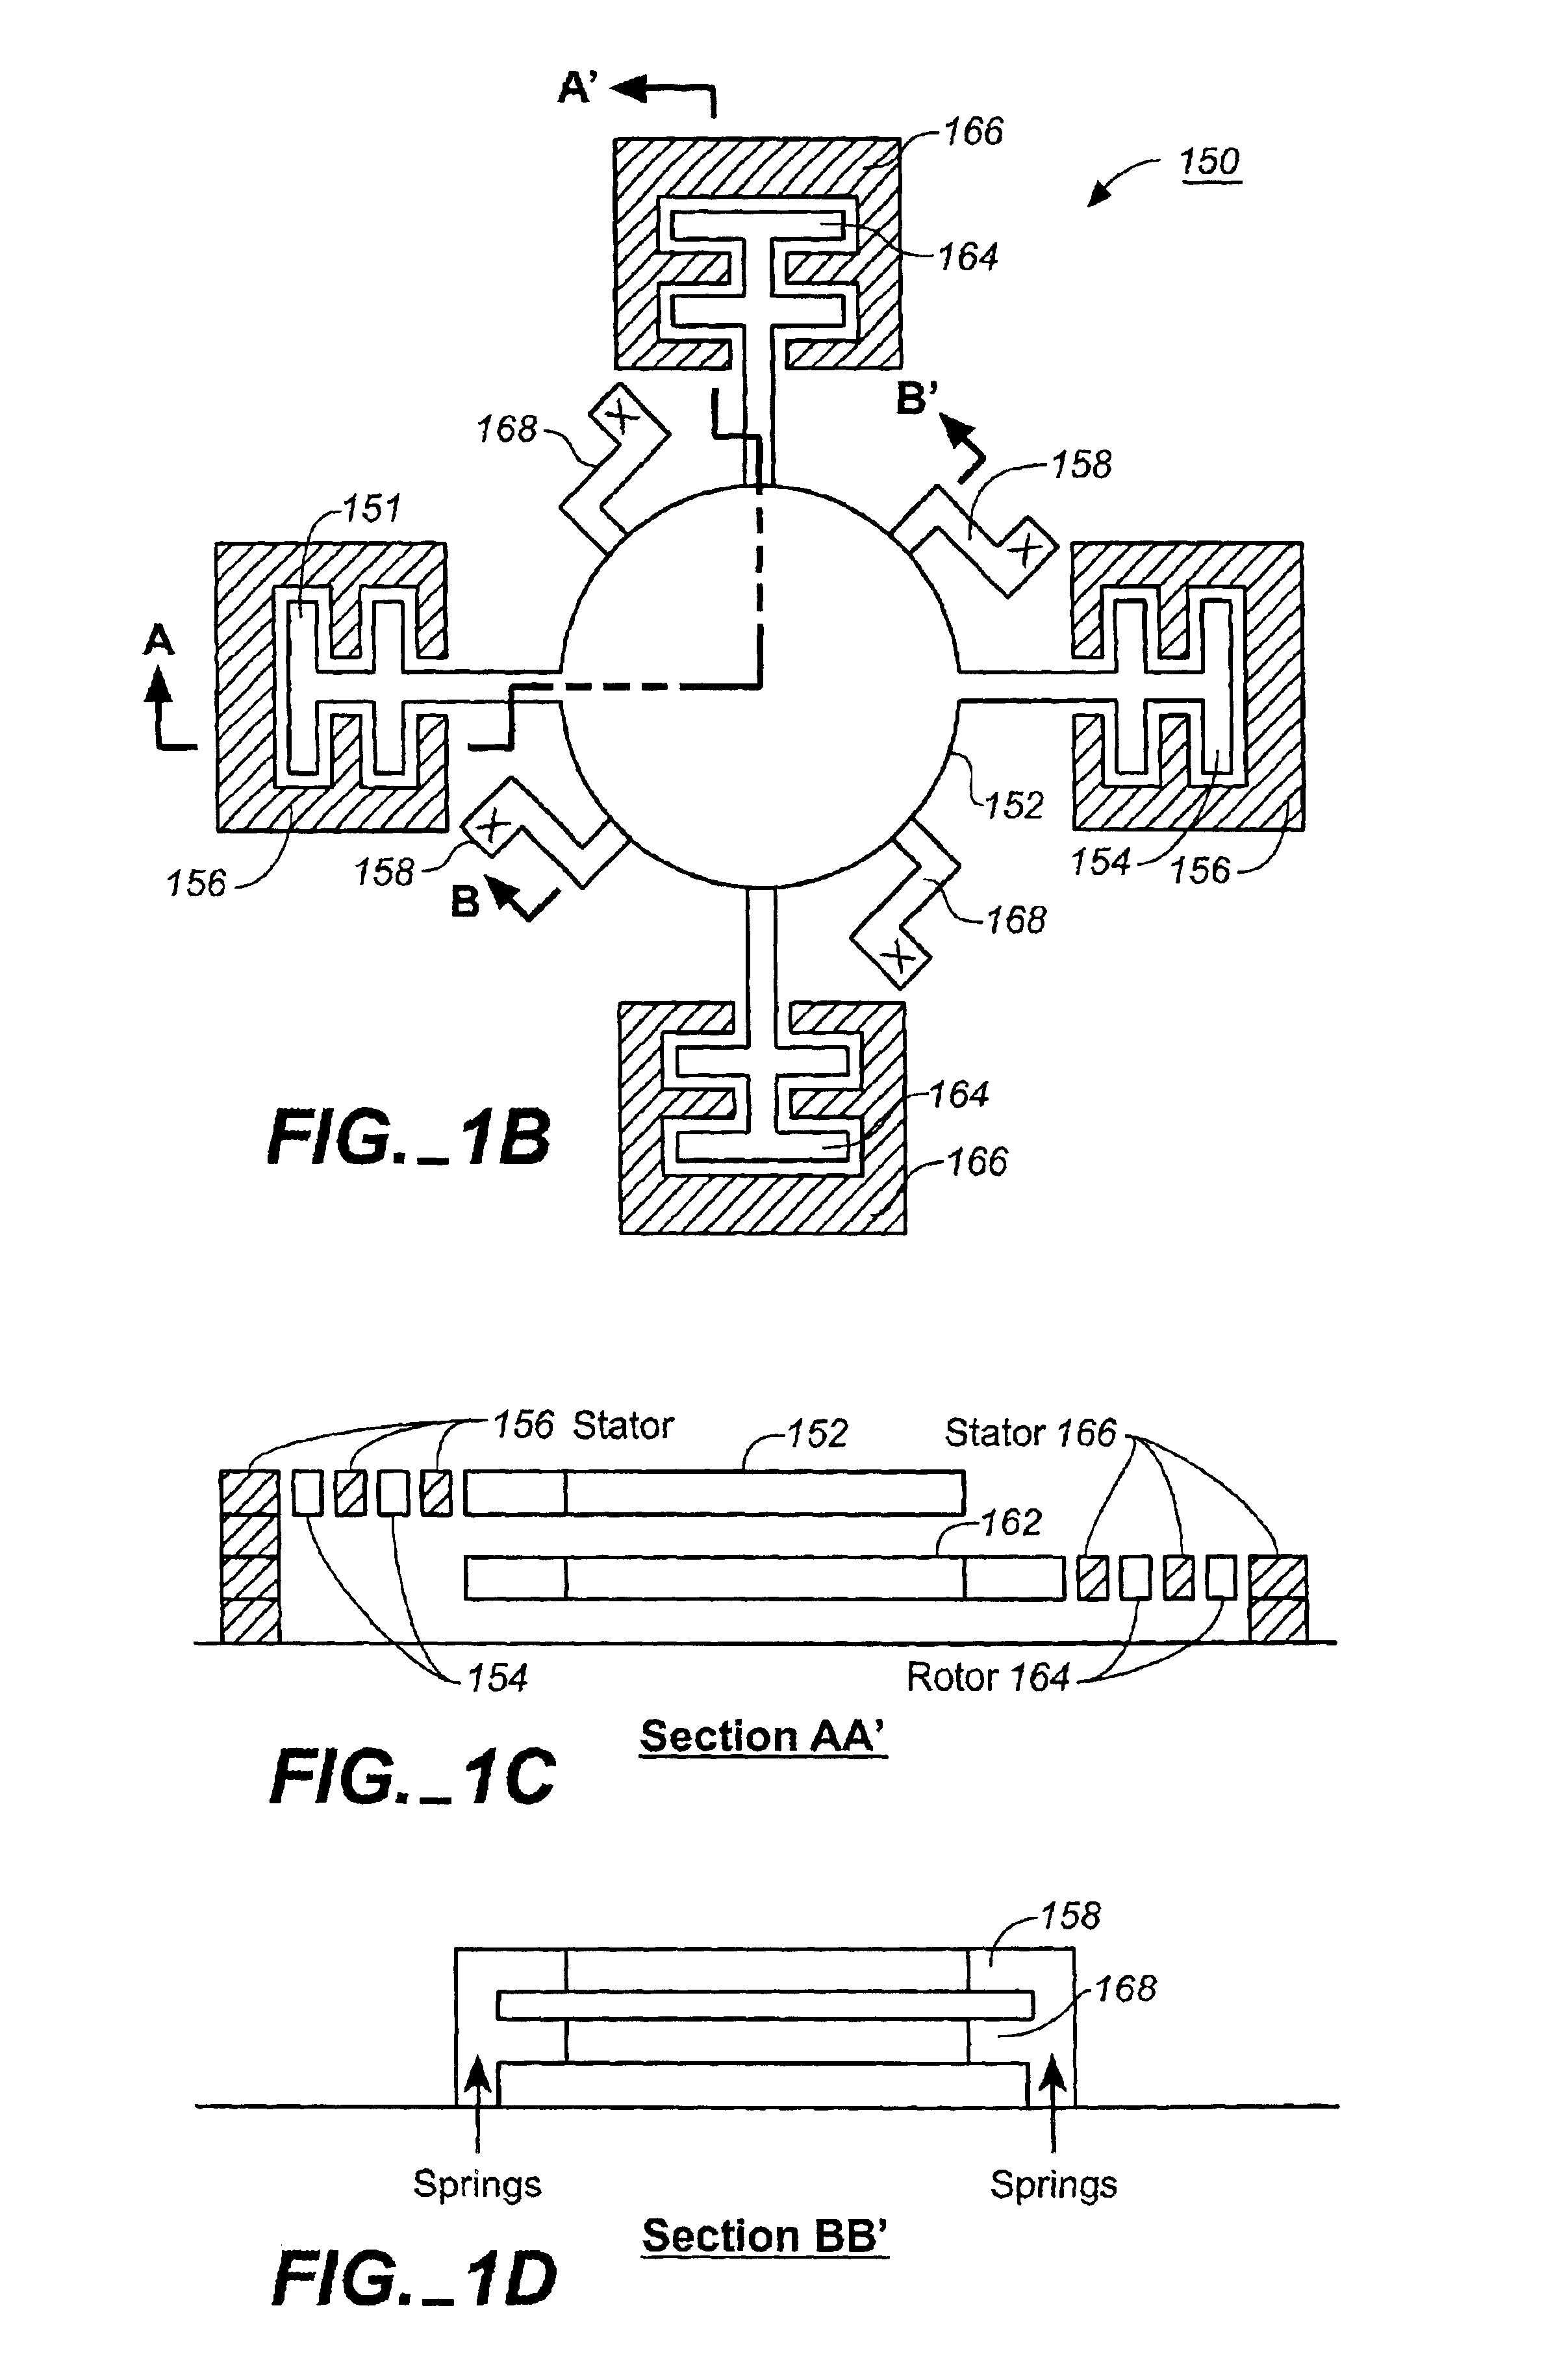 Electrostatic control of micro-optical components